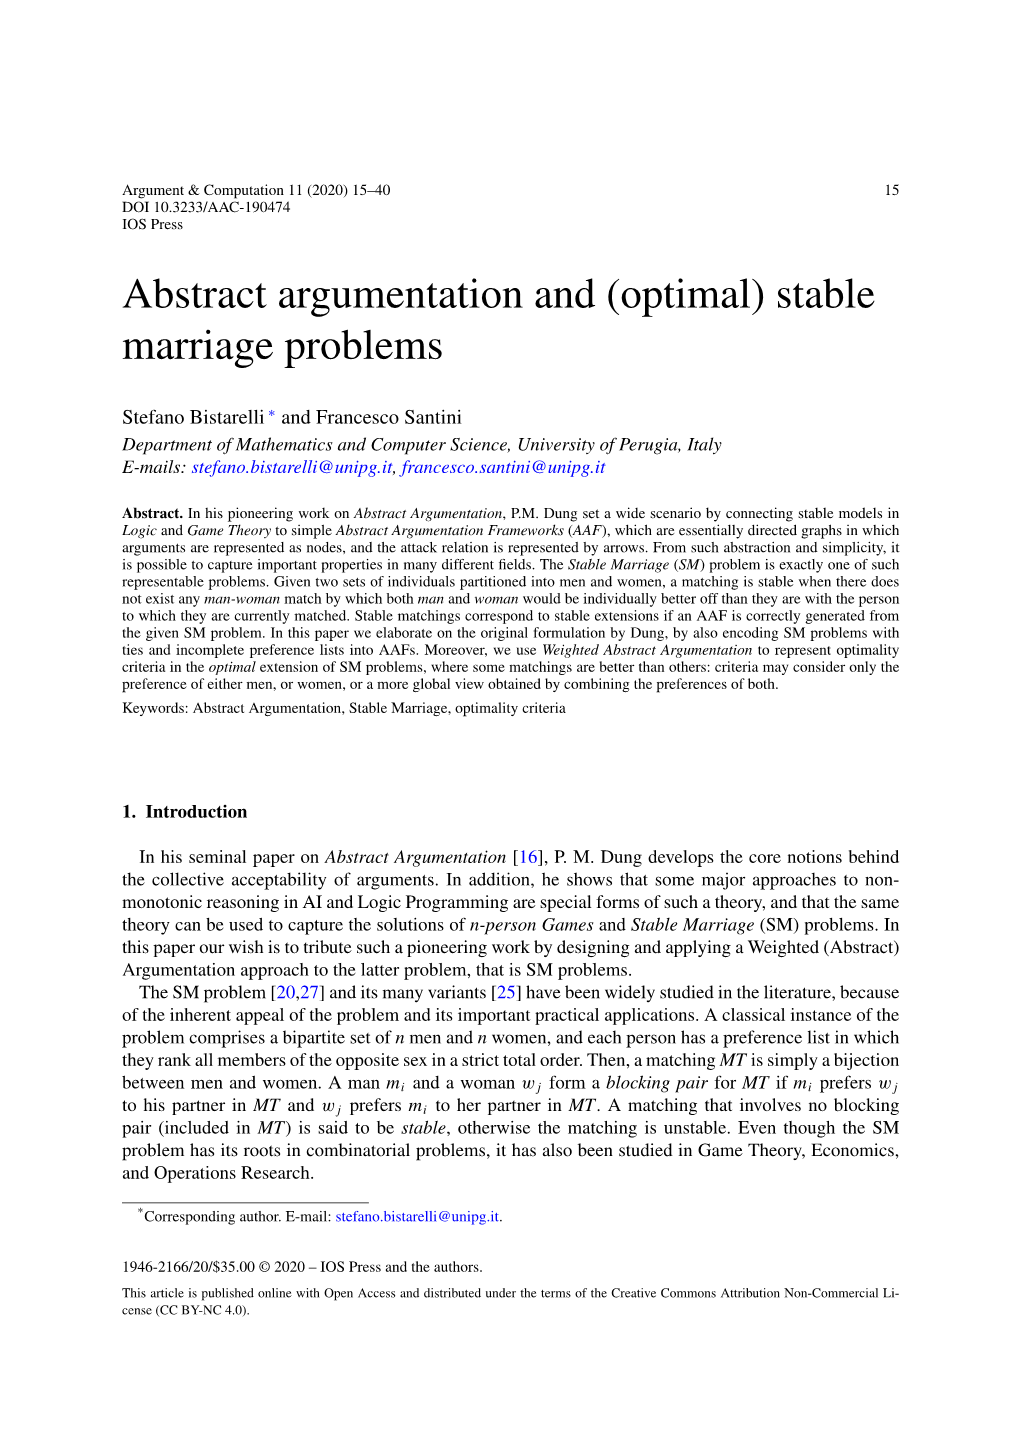 Abstract Argumentation and (Optimal) Stable Marriage Problems